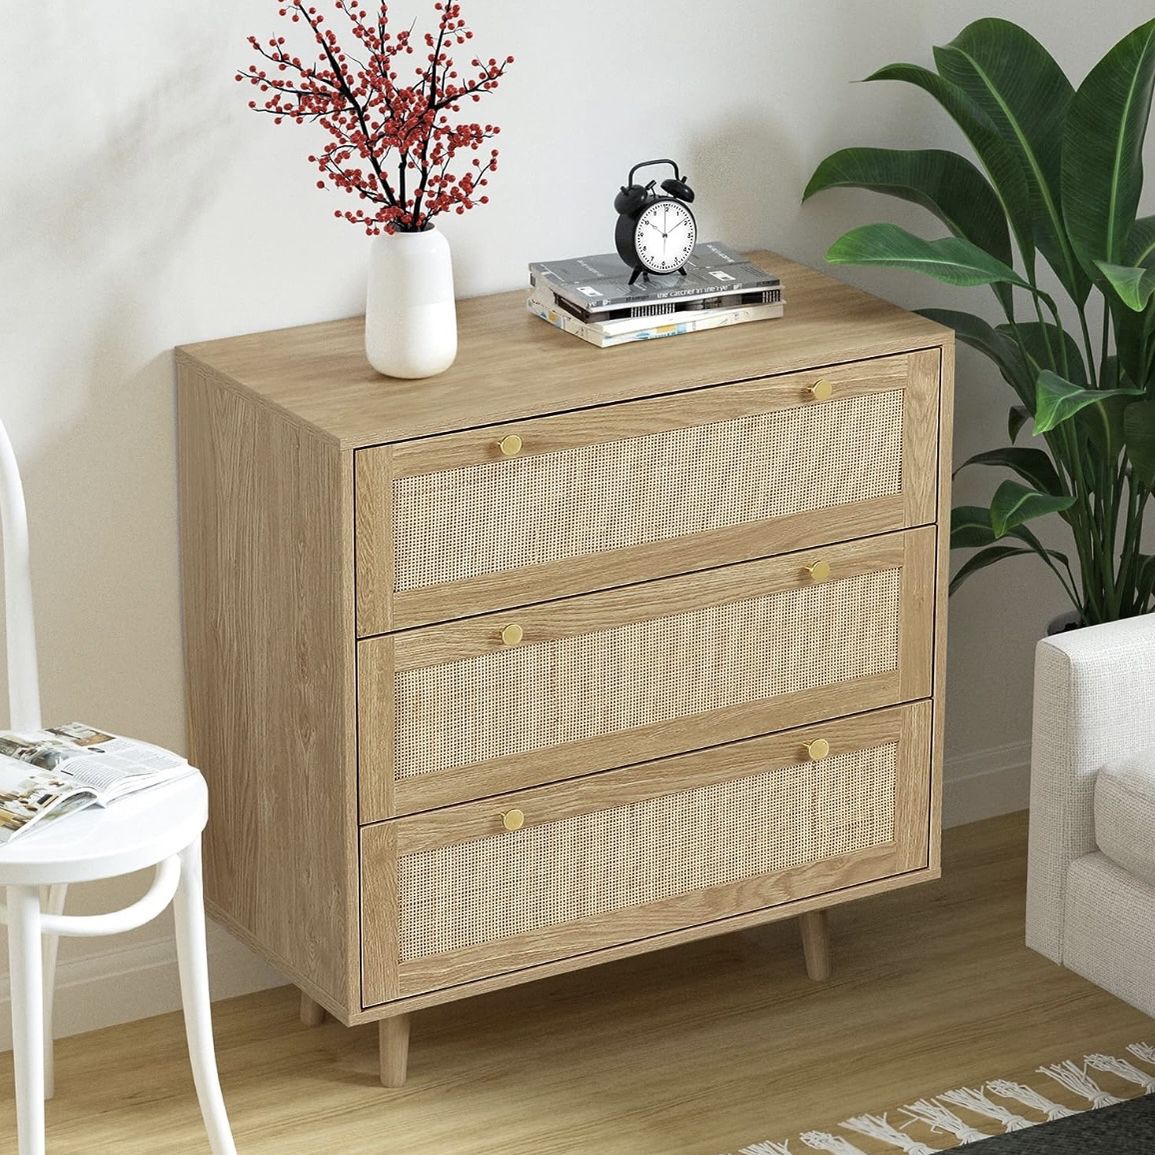 29-94 Anmytek 3 Drawer Dresser for Bedroom, Rattan Dresser Modern Wood Chest of Drawers with Spacious Storage